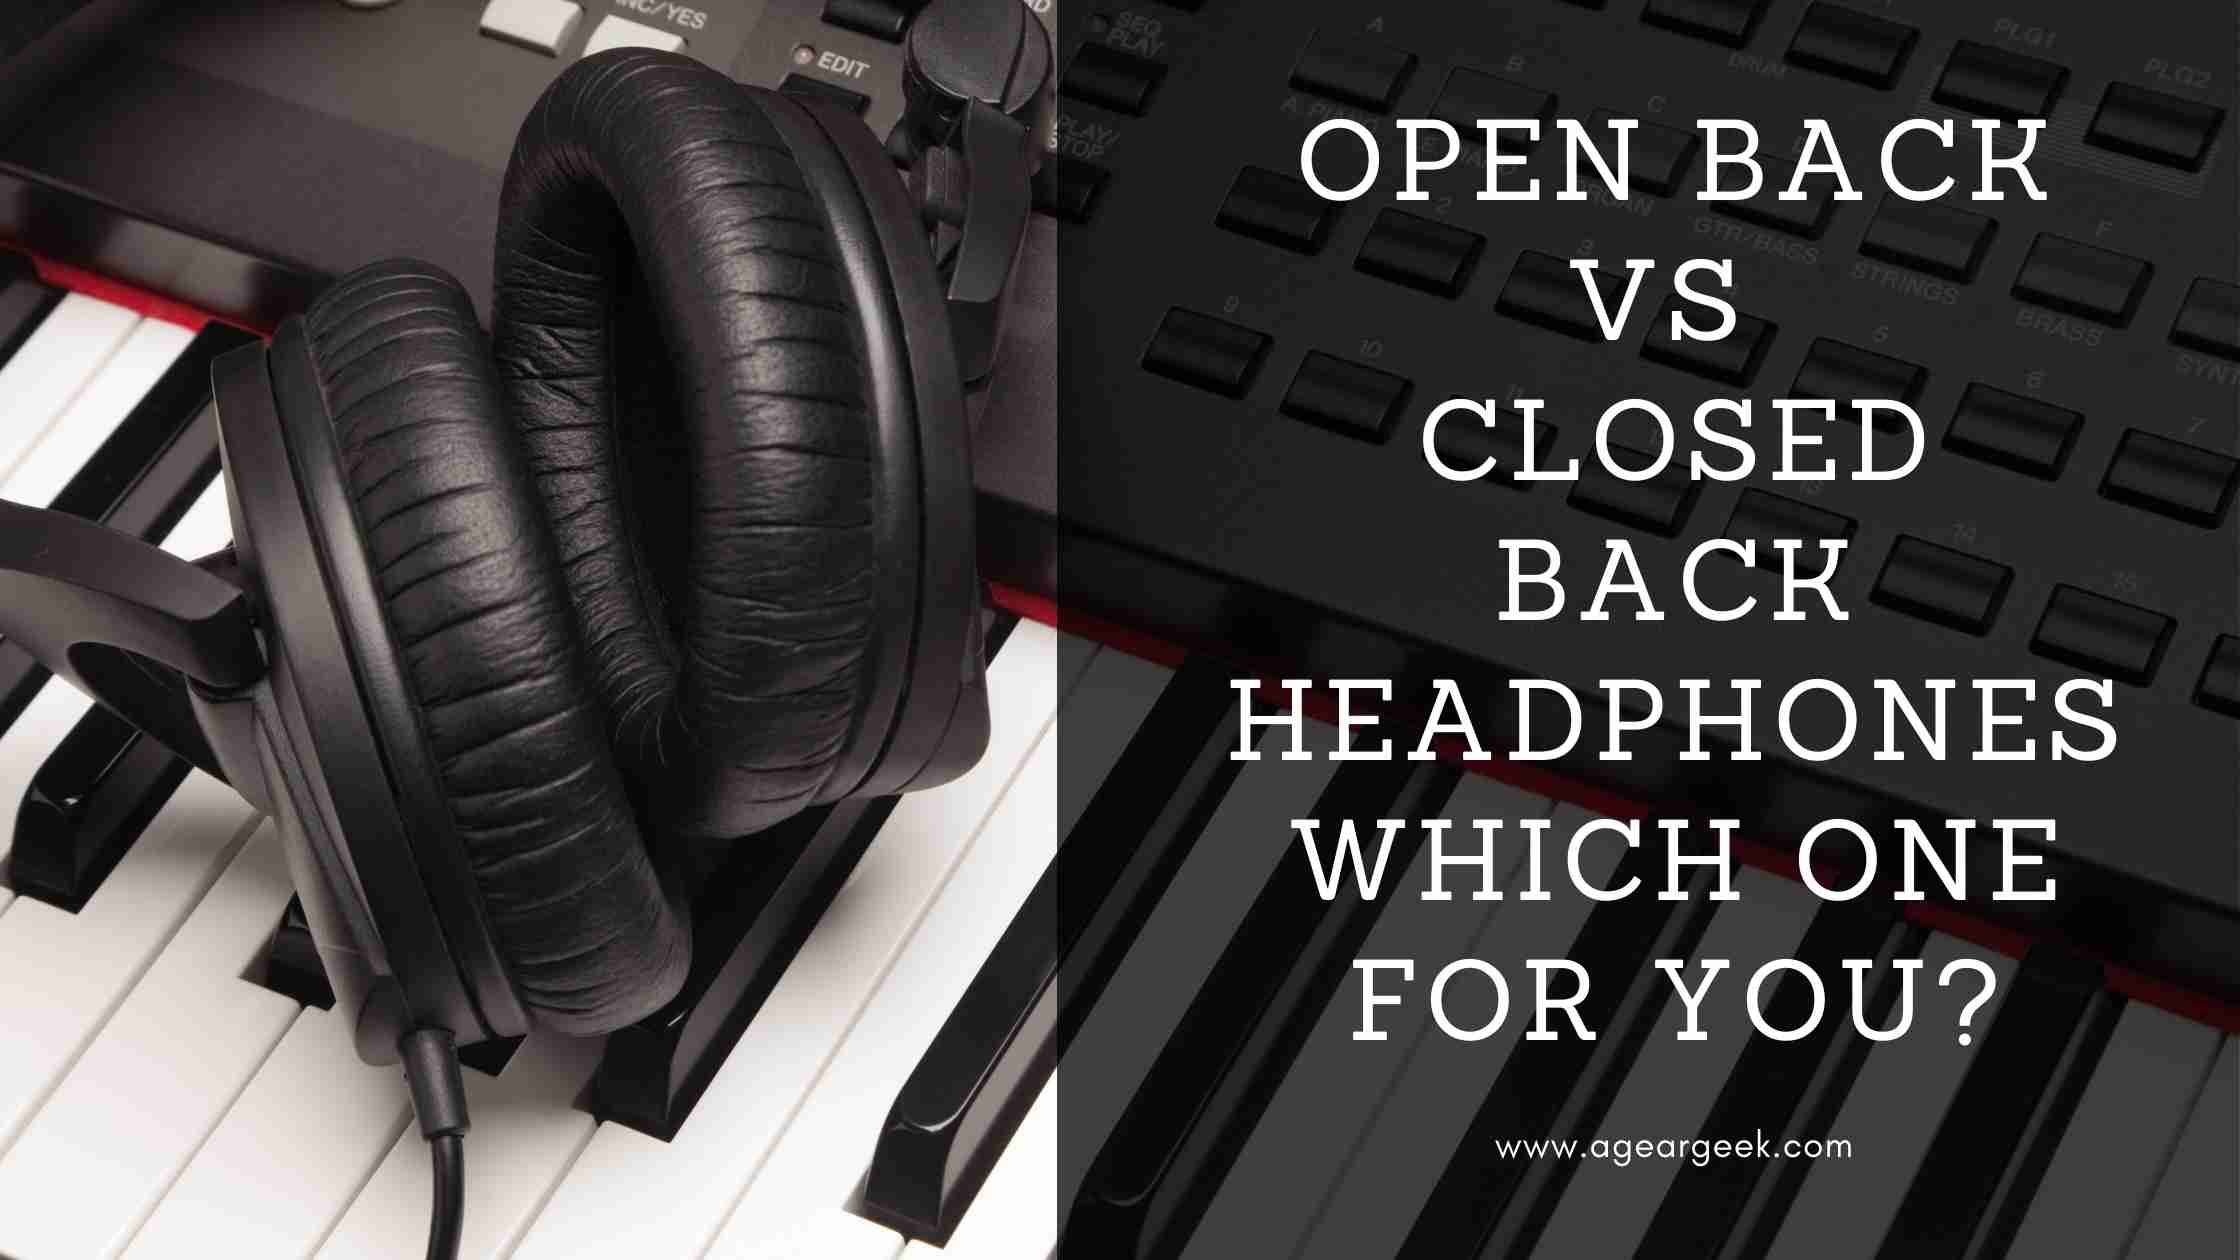 You are currently viewing Open back vs closed back headphones, which one for you?